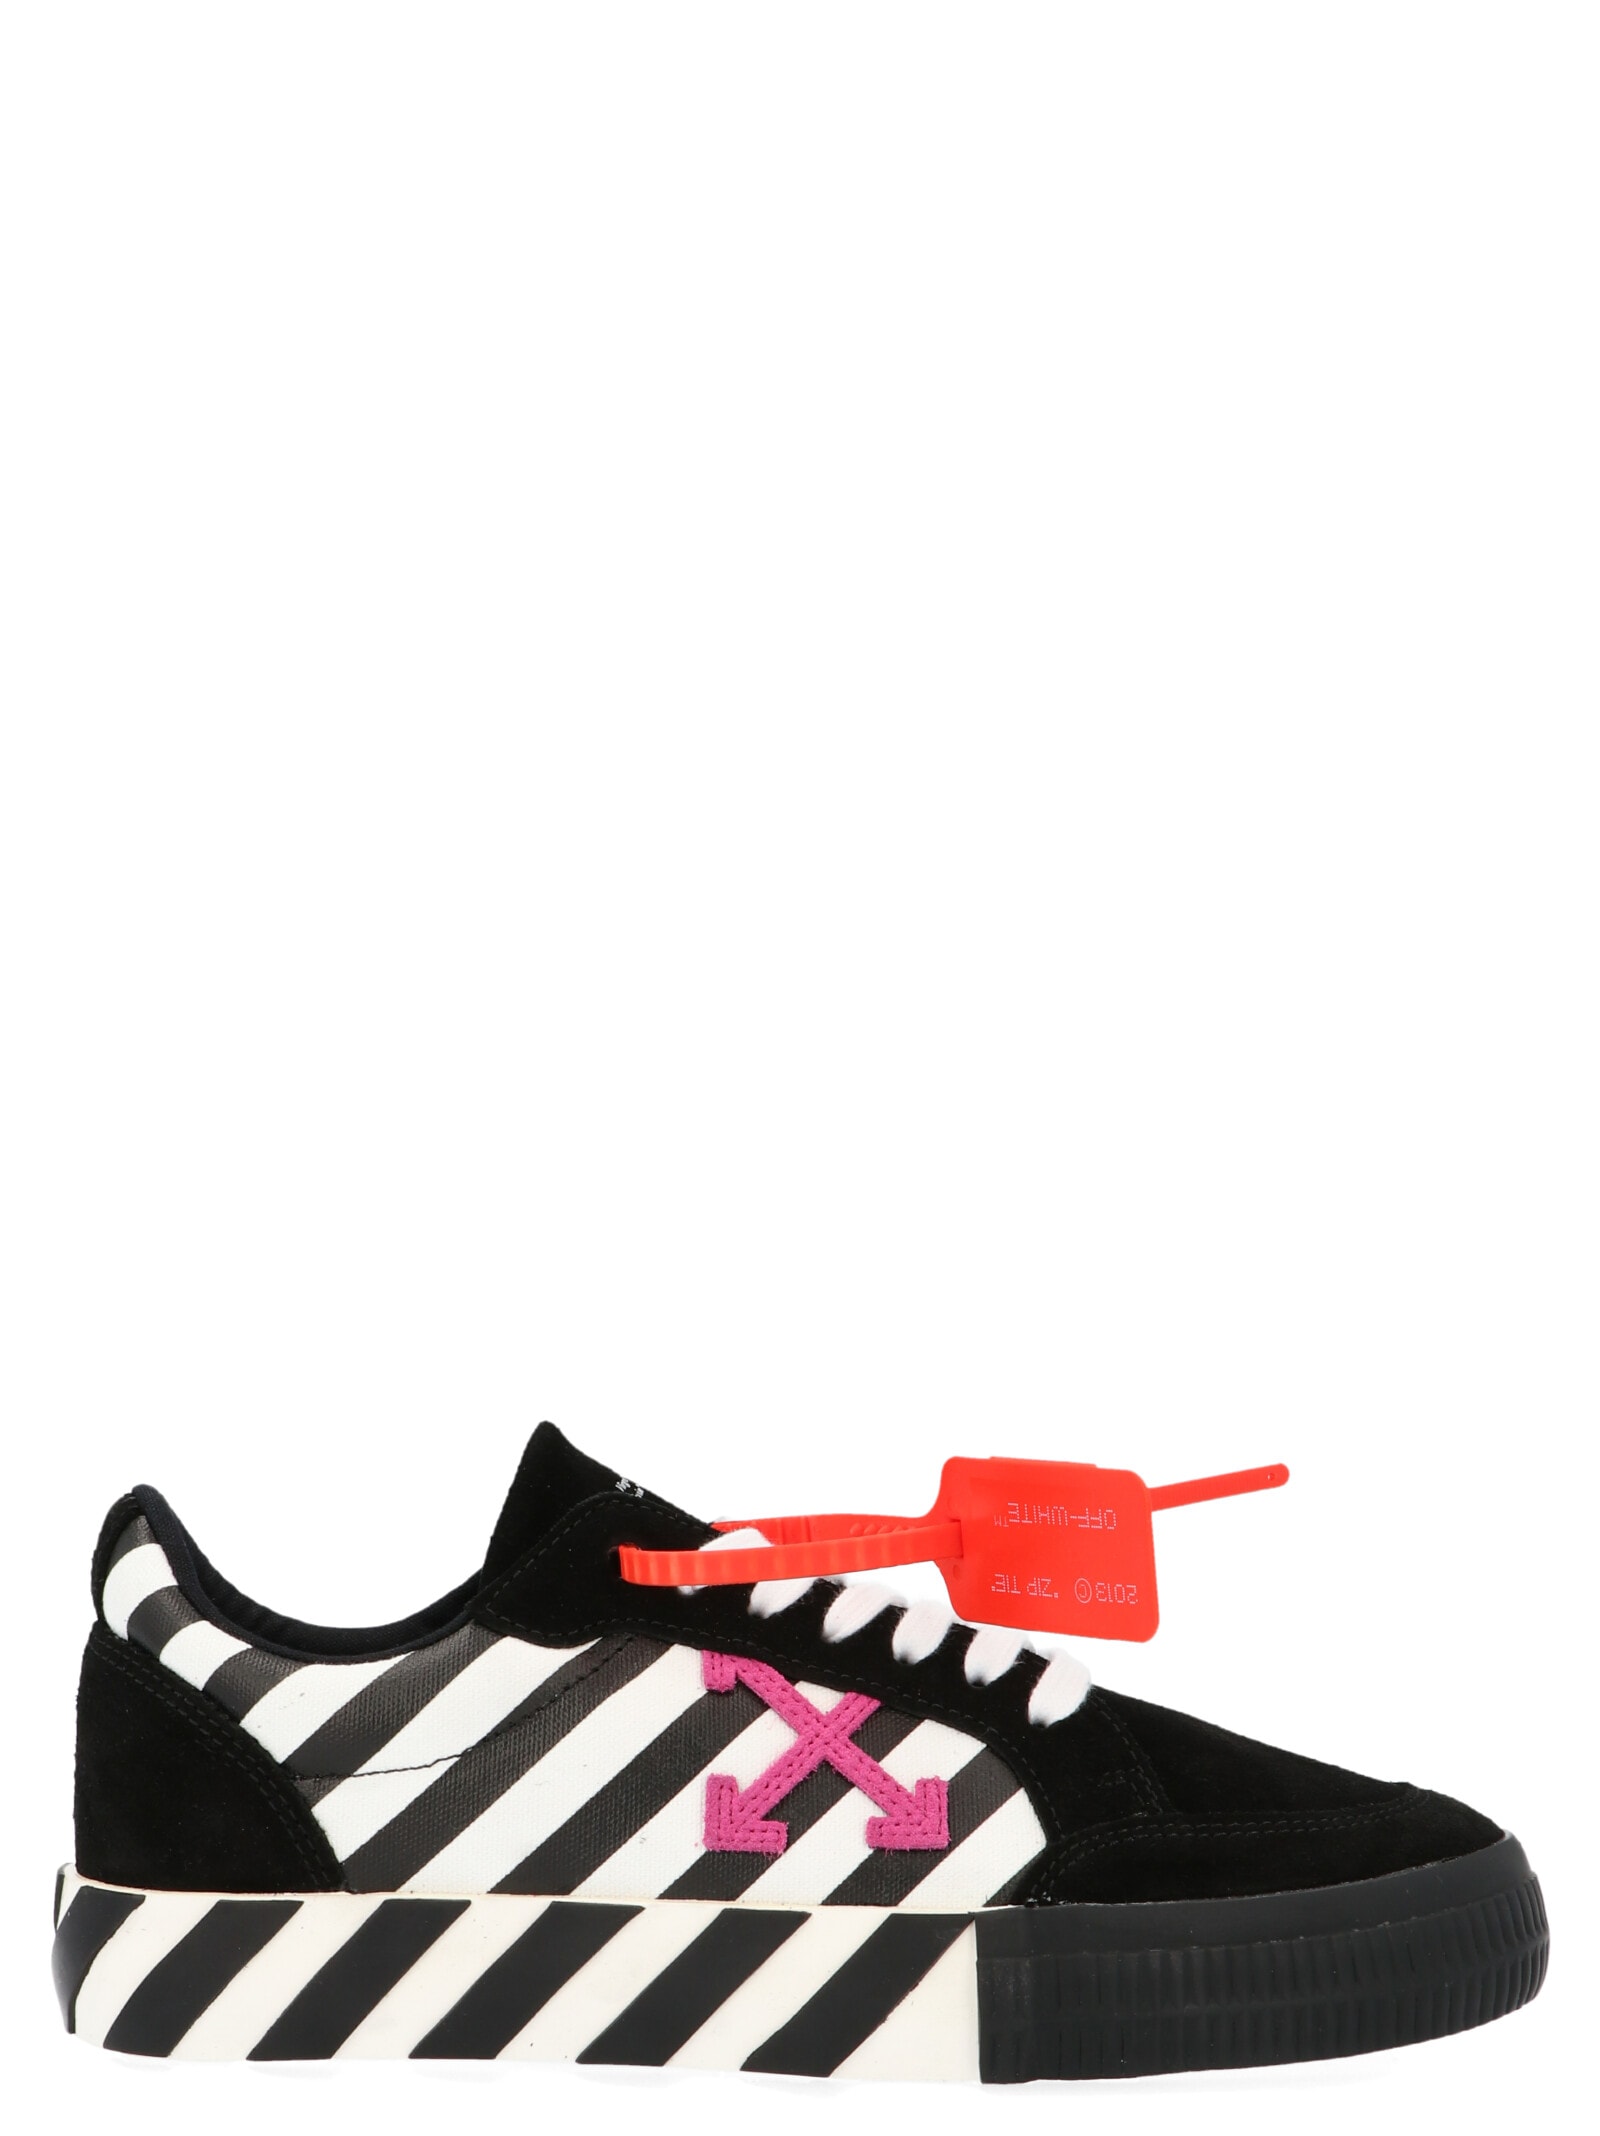 OFF-WHITE OFF-WHITE ARROW SHOES,11207969